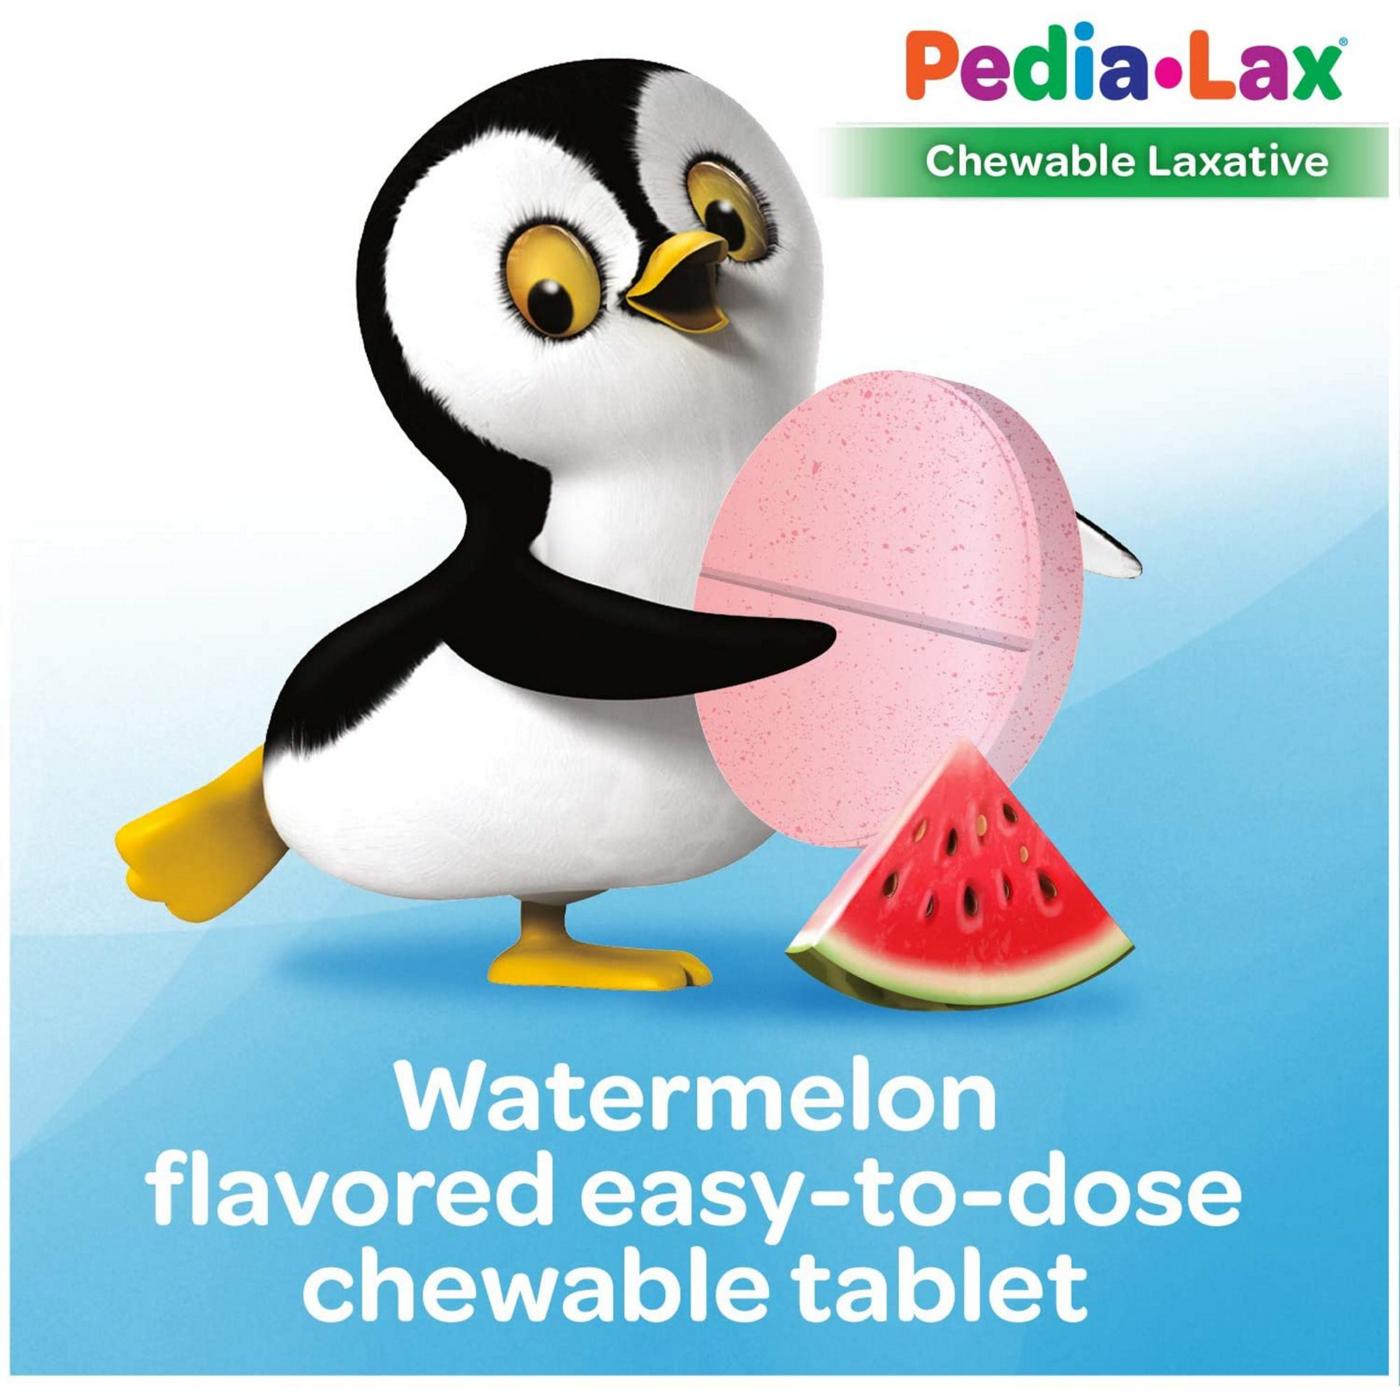 Pedia-Lax Laxative Chewable Tablets - Watermelon; image 3 of 5